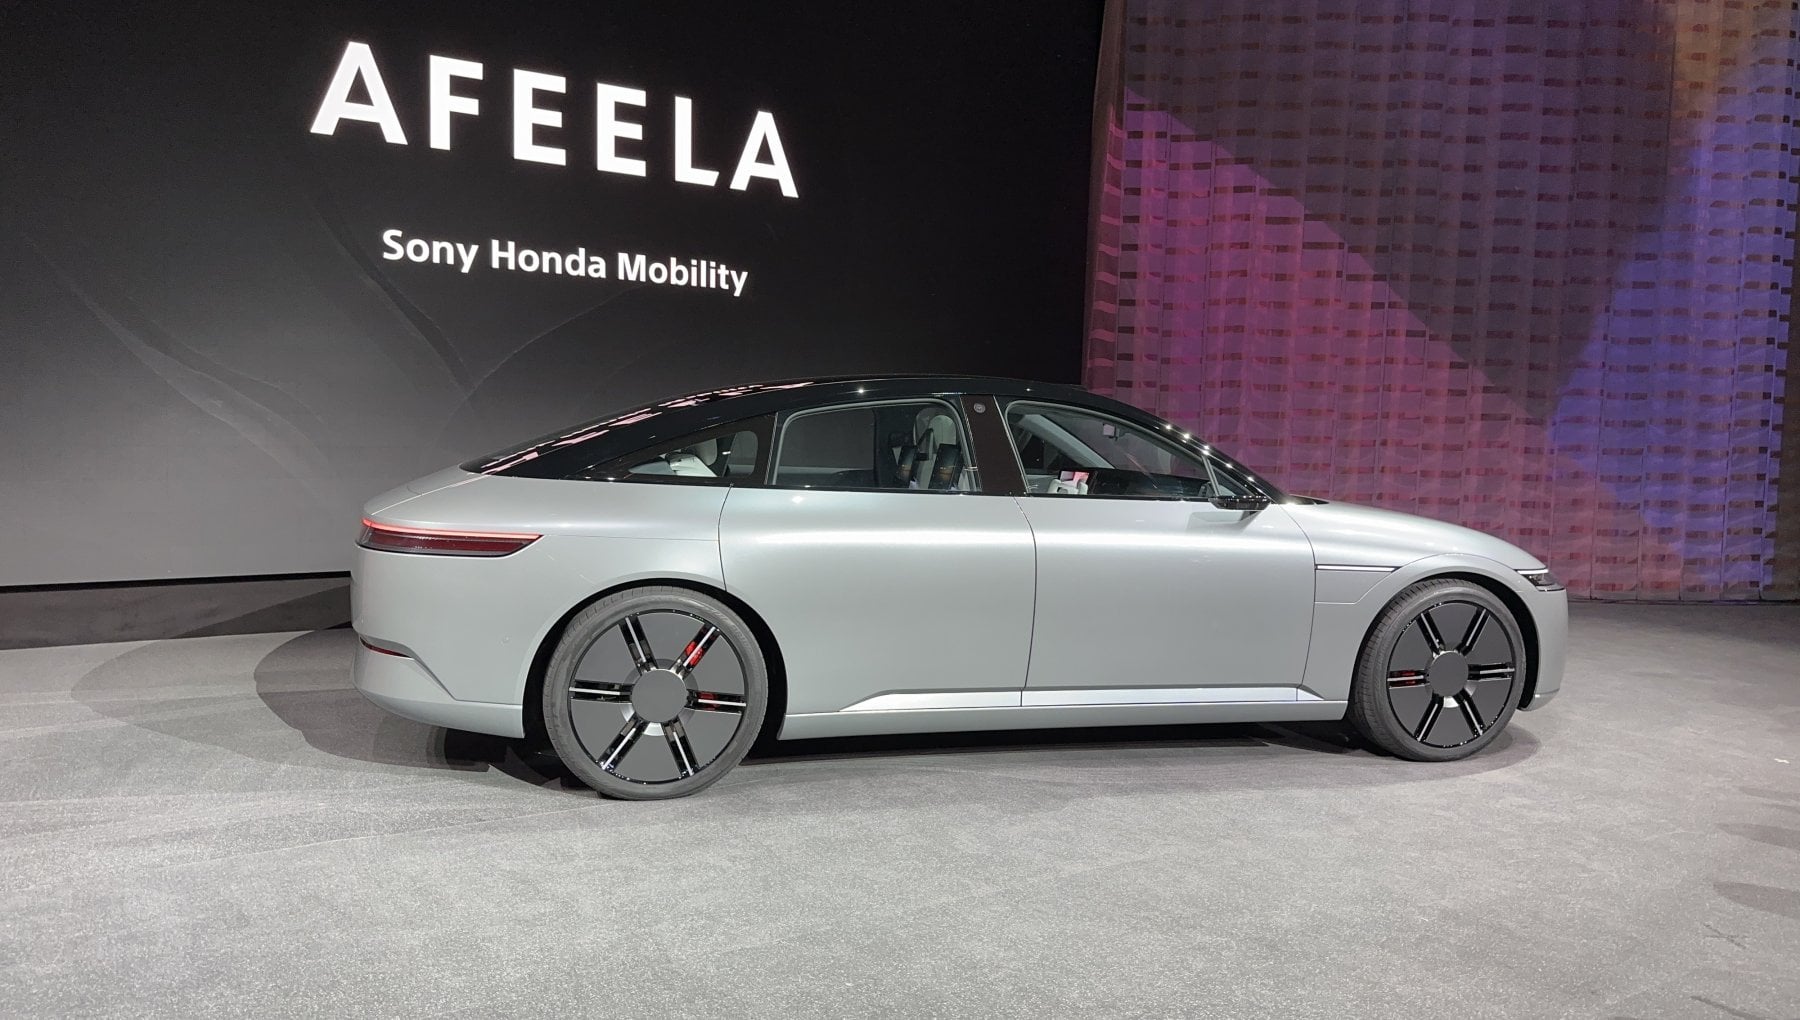 Sony and Honda are developing the electric vehicle Afeela EV.